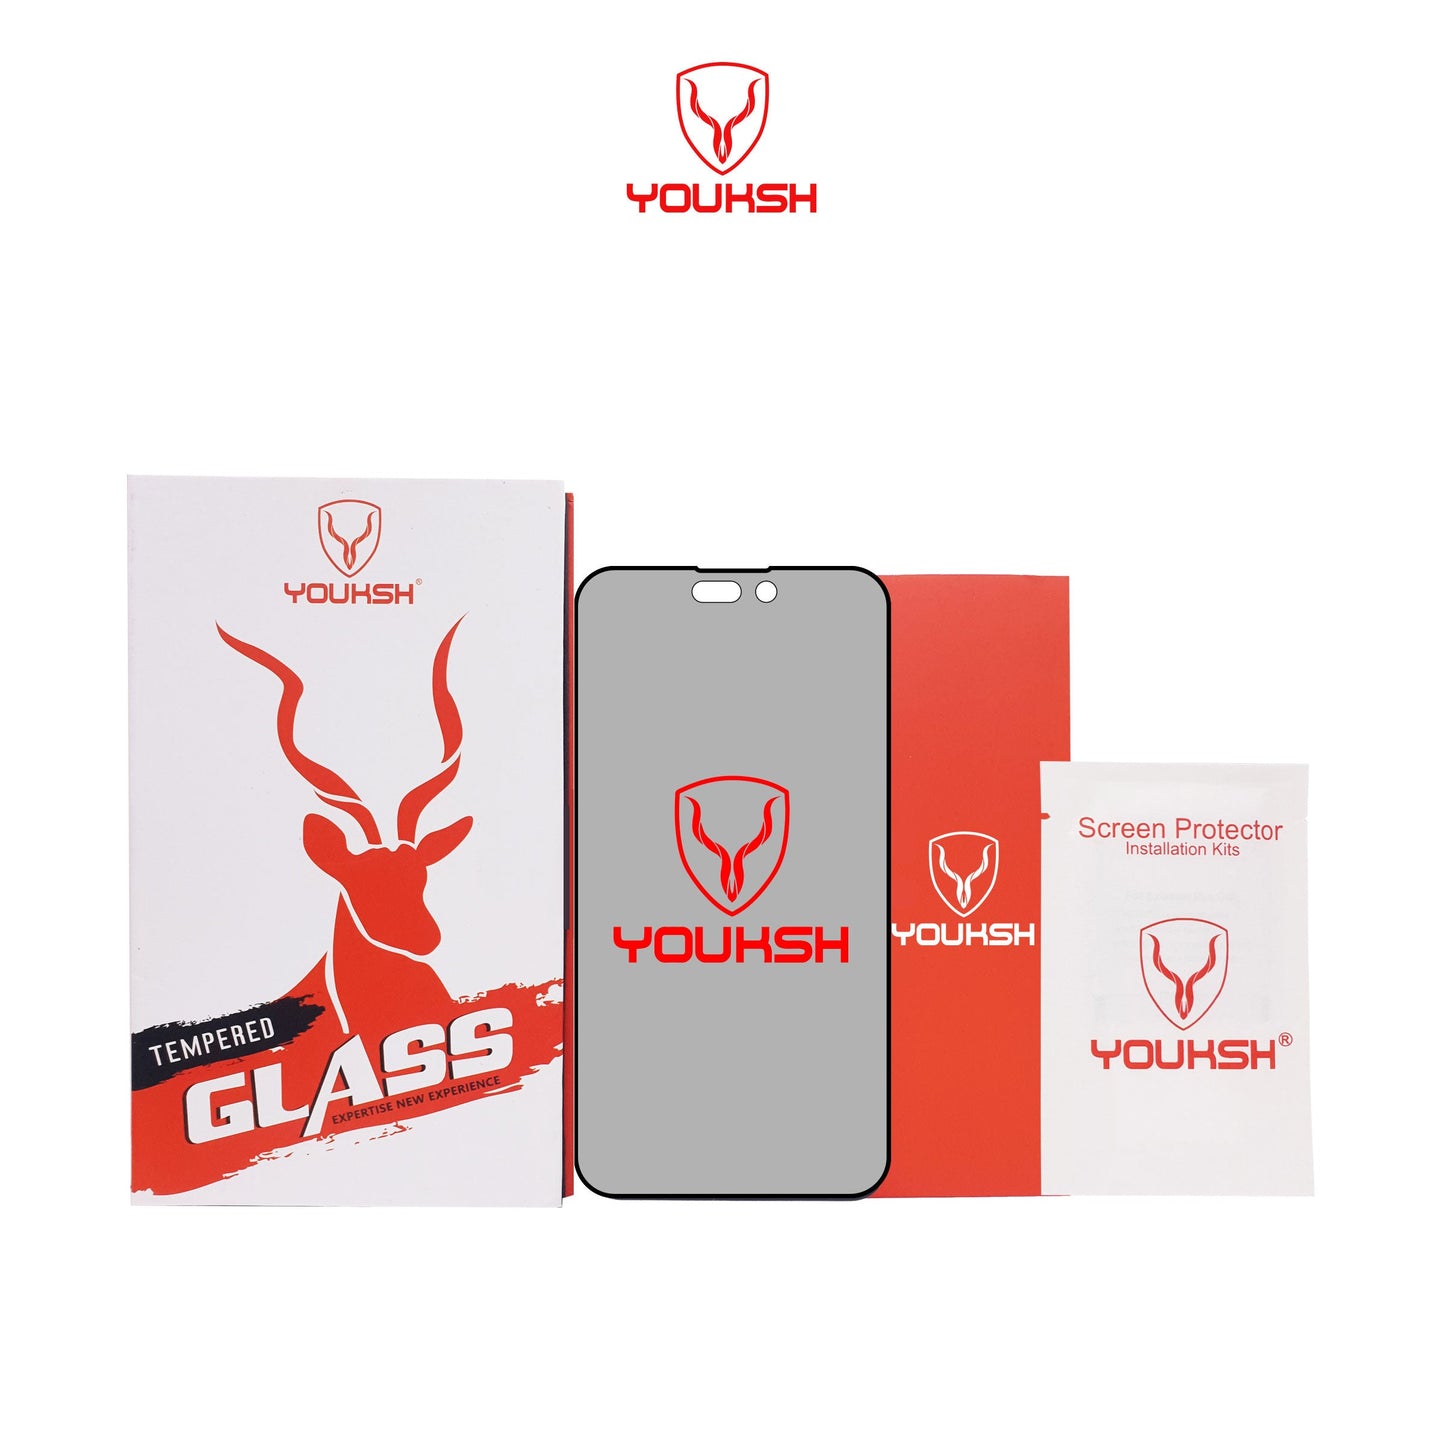 YOUKSH Apple iPhone 14 Pro Max (6.7) Privacy Glass Protector - YOUKSH Apple iPhone 14 Pro Max (6.7) Anti Static Glass Protector - With YOUKSH Installation kit.